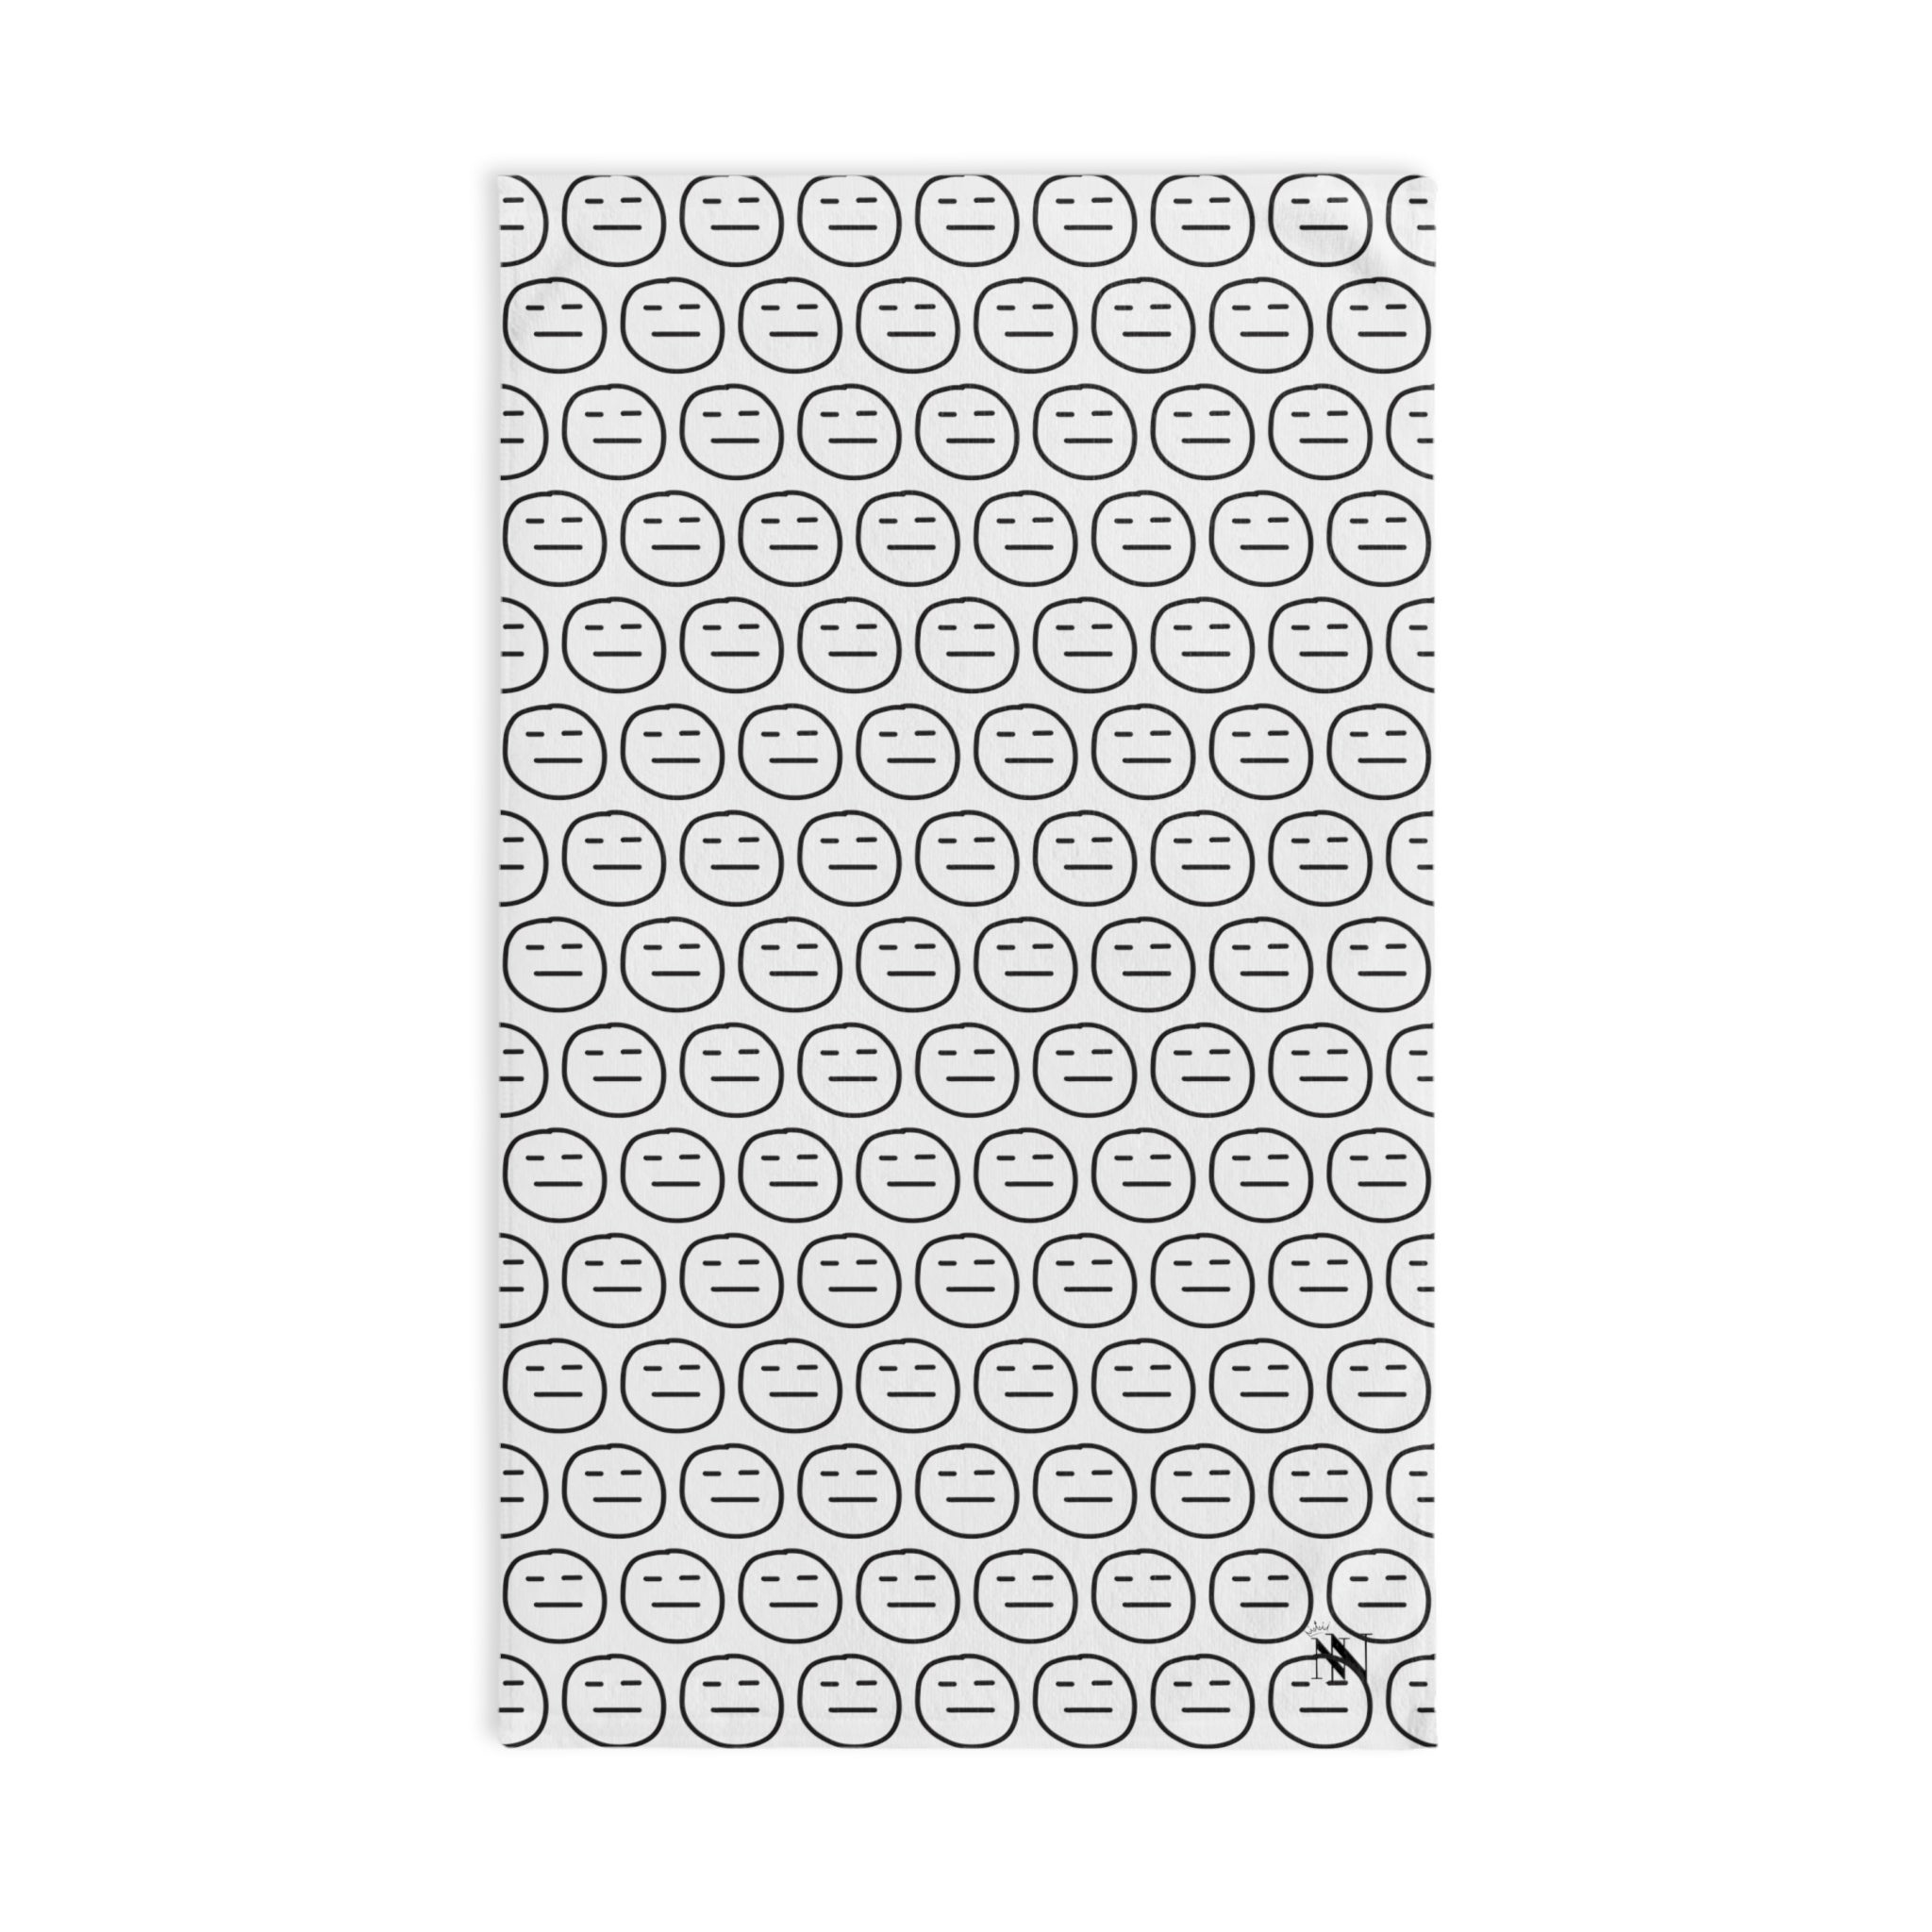 Mehr Pattern Emoji BlackWhite | Funny Gifts for Men - Gifts for Him - Birthday Gifts for Men, Him, Her, Husband, Boyfriend, Girlfriend, New Couple Gifts, Fathers & Valentines Day Gifts, Christmas Gifts NECTAR NAPKINS